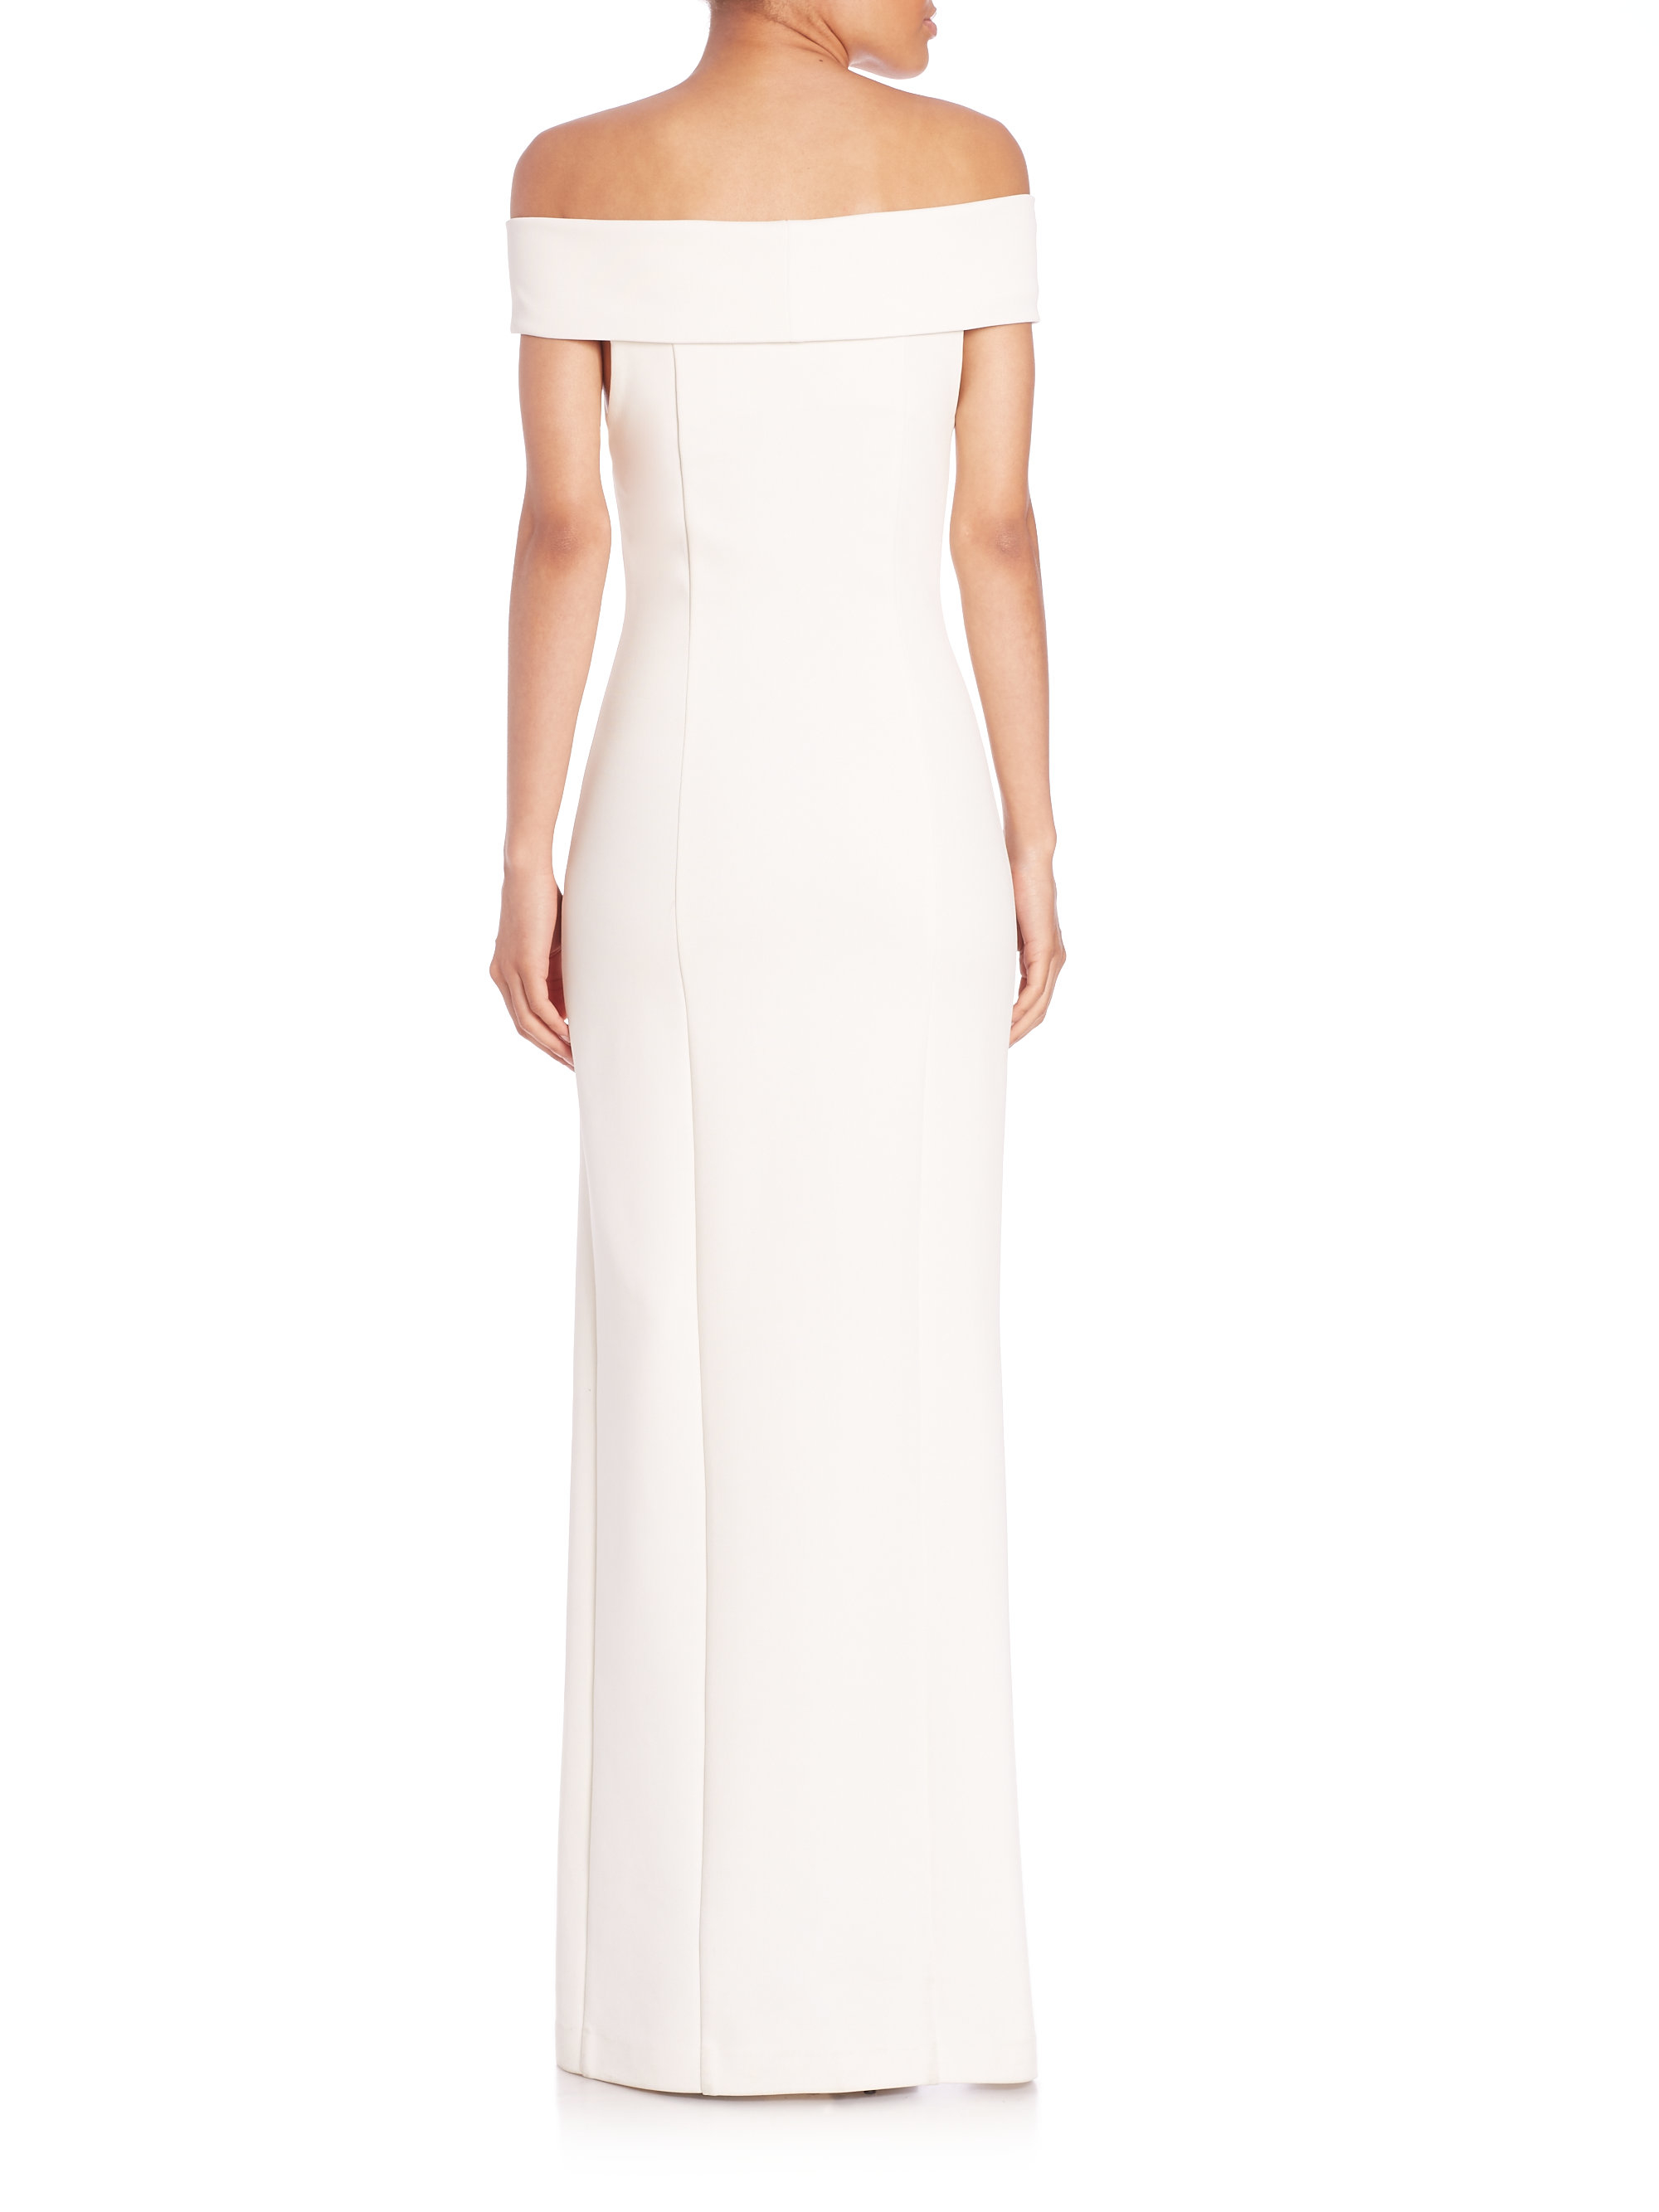 Lyst - Nicholas Bandage Off-the-shoulder Gown in Natural